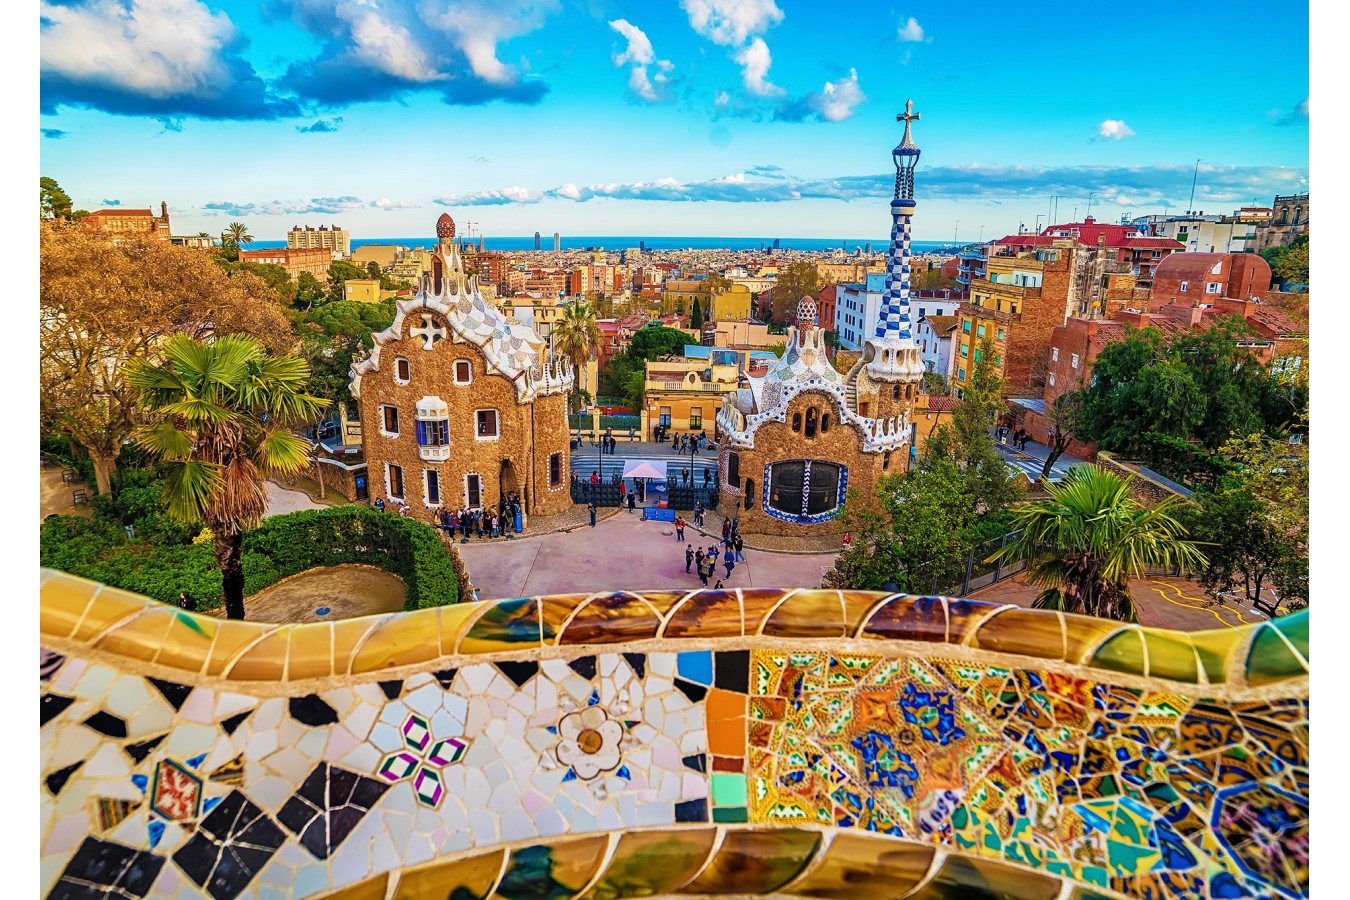 Puzzle 1000 piese - View from Park Guell, Barcelona (Enjoy-1056)